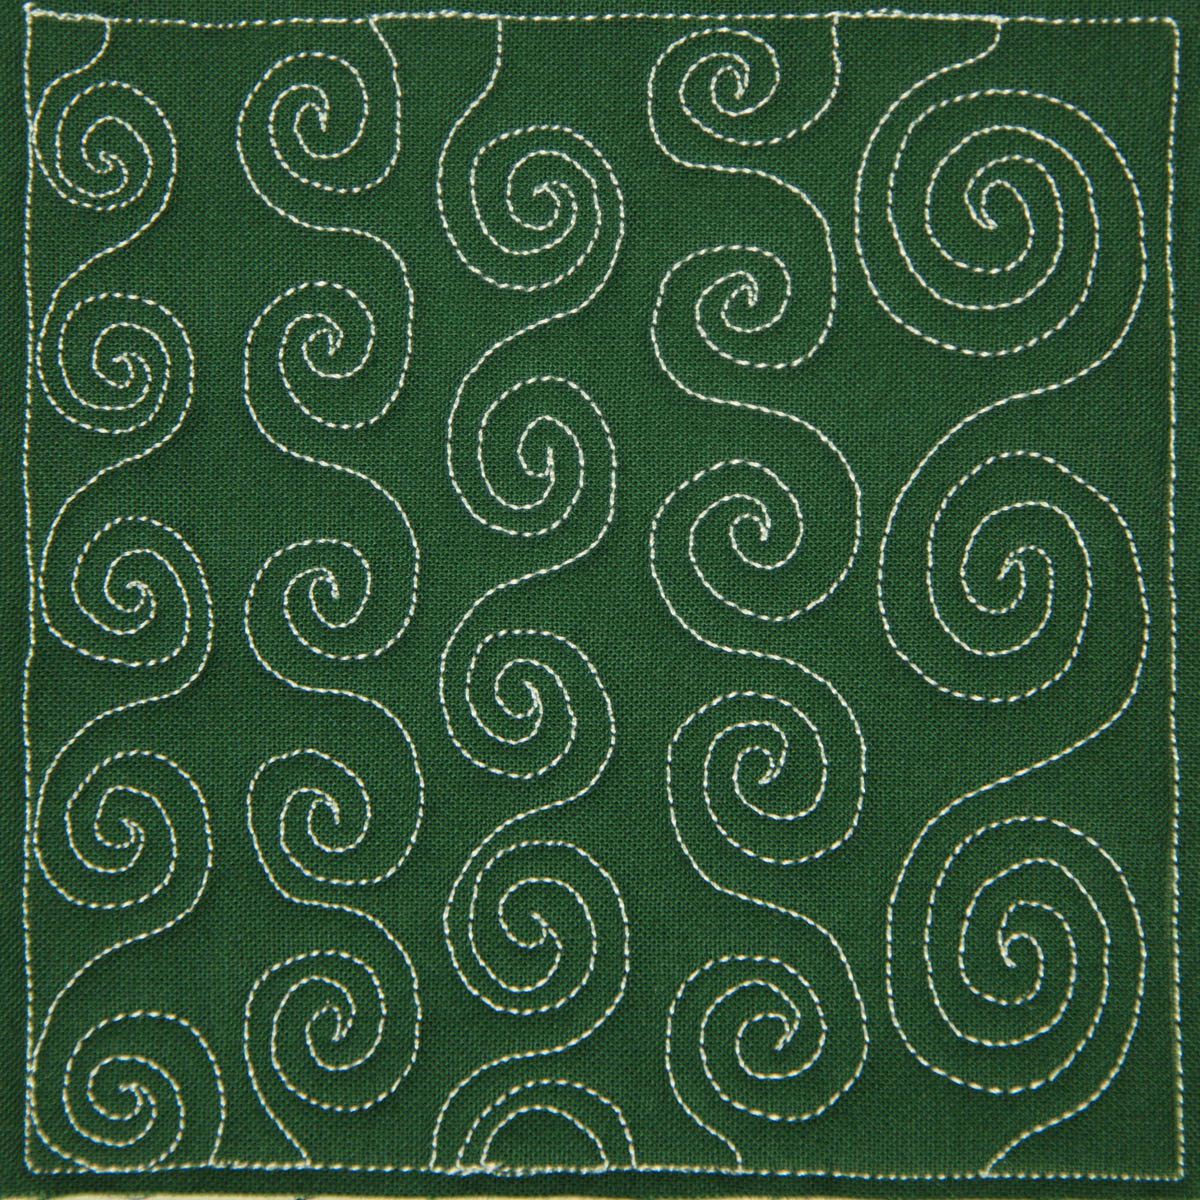 the-free-motion-quilting-project-day-18-spiral-chain